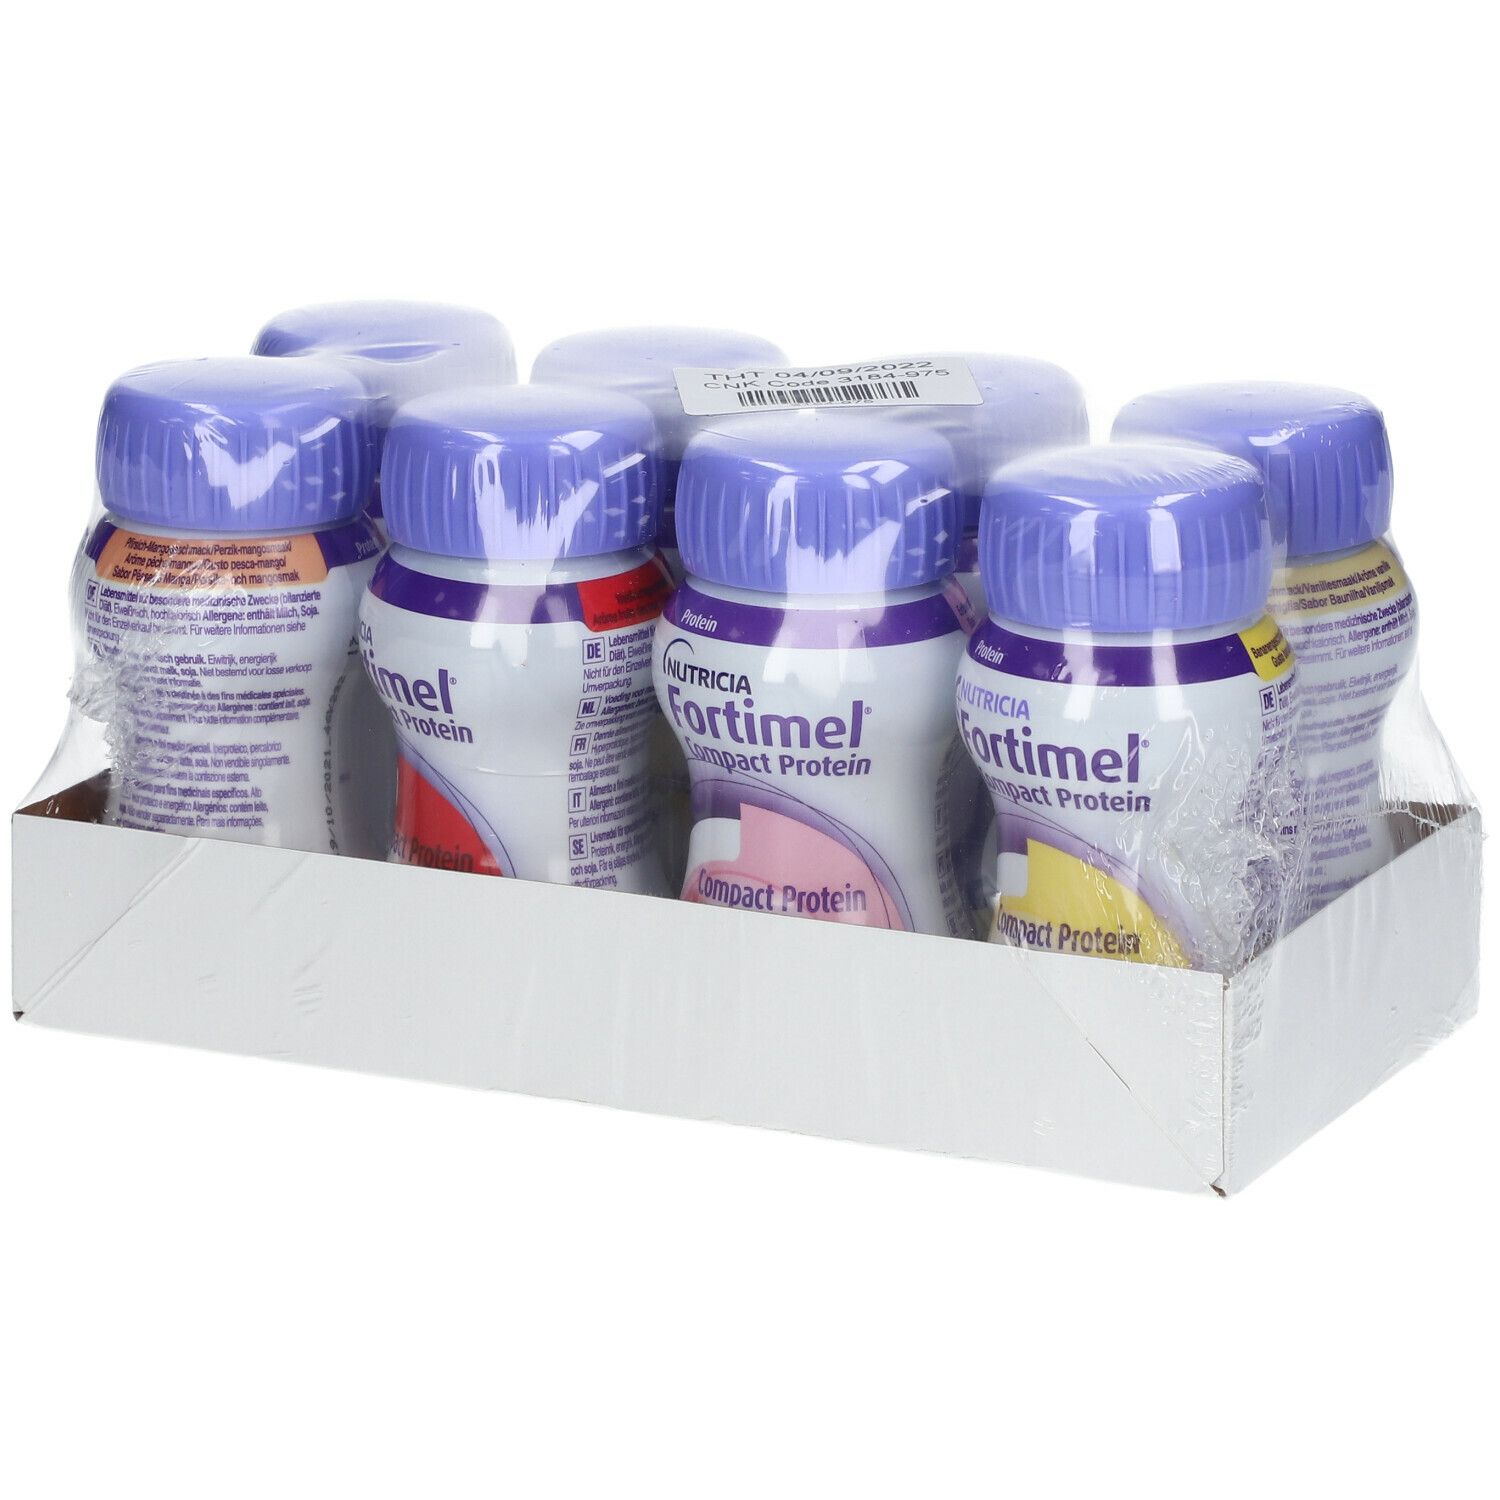 Nutricia Fortimel® Compact Protein Mixed multipack 8x125 ml solution(s) buvable(s)